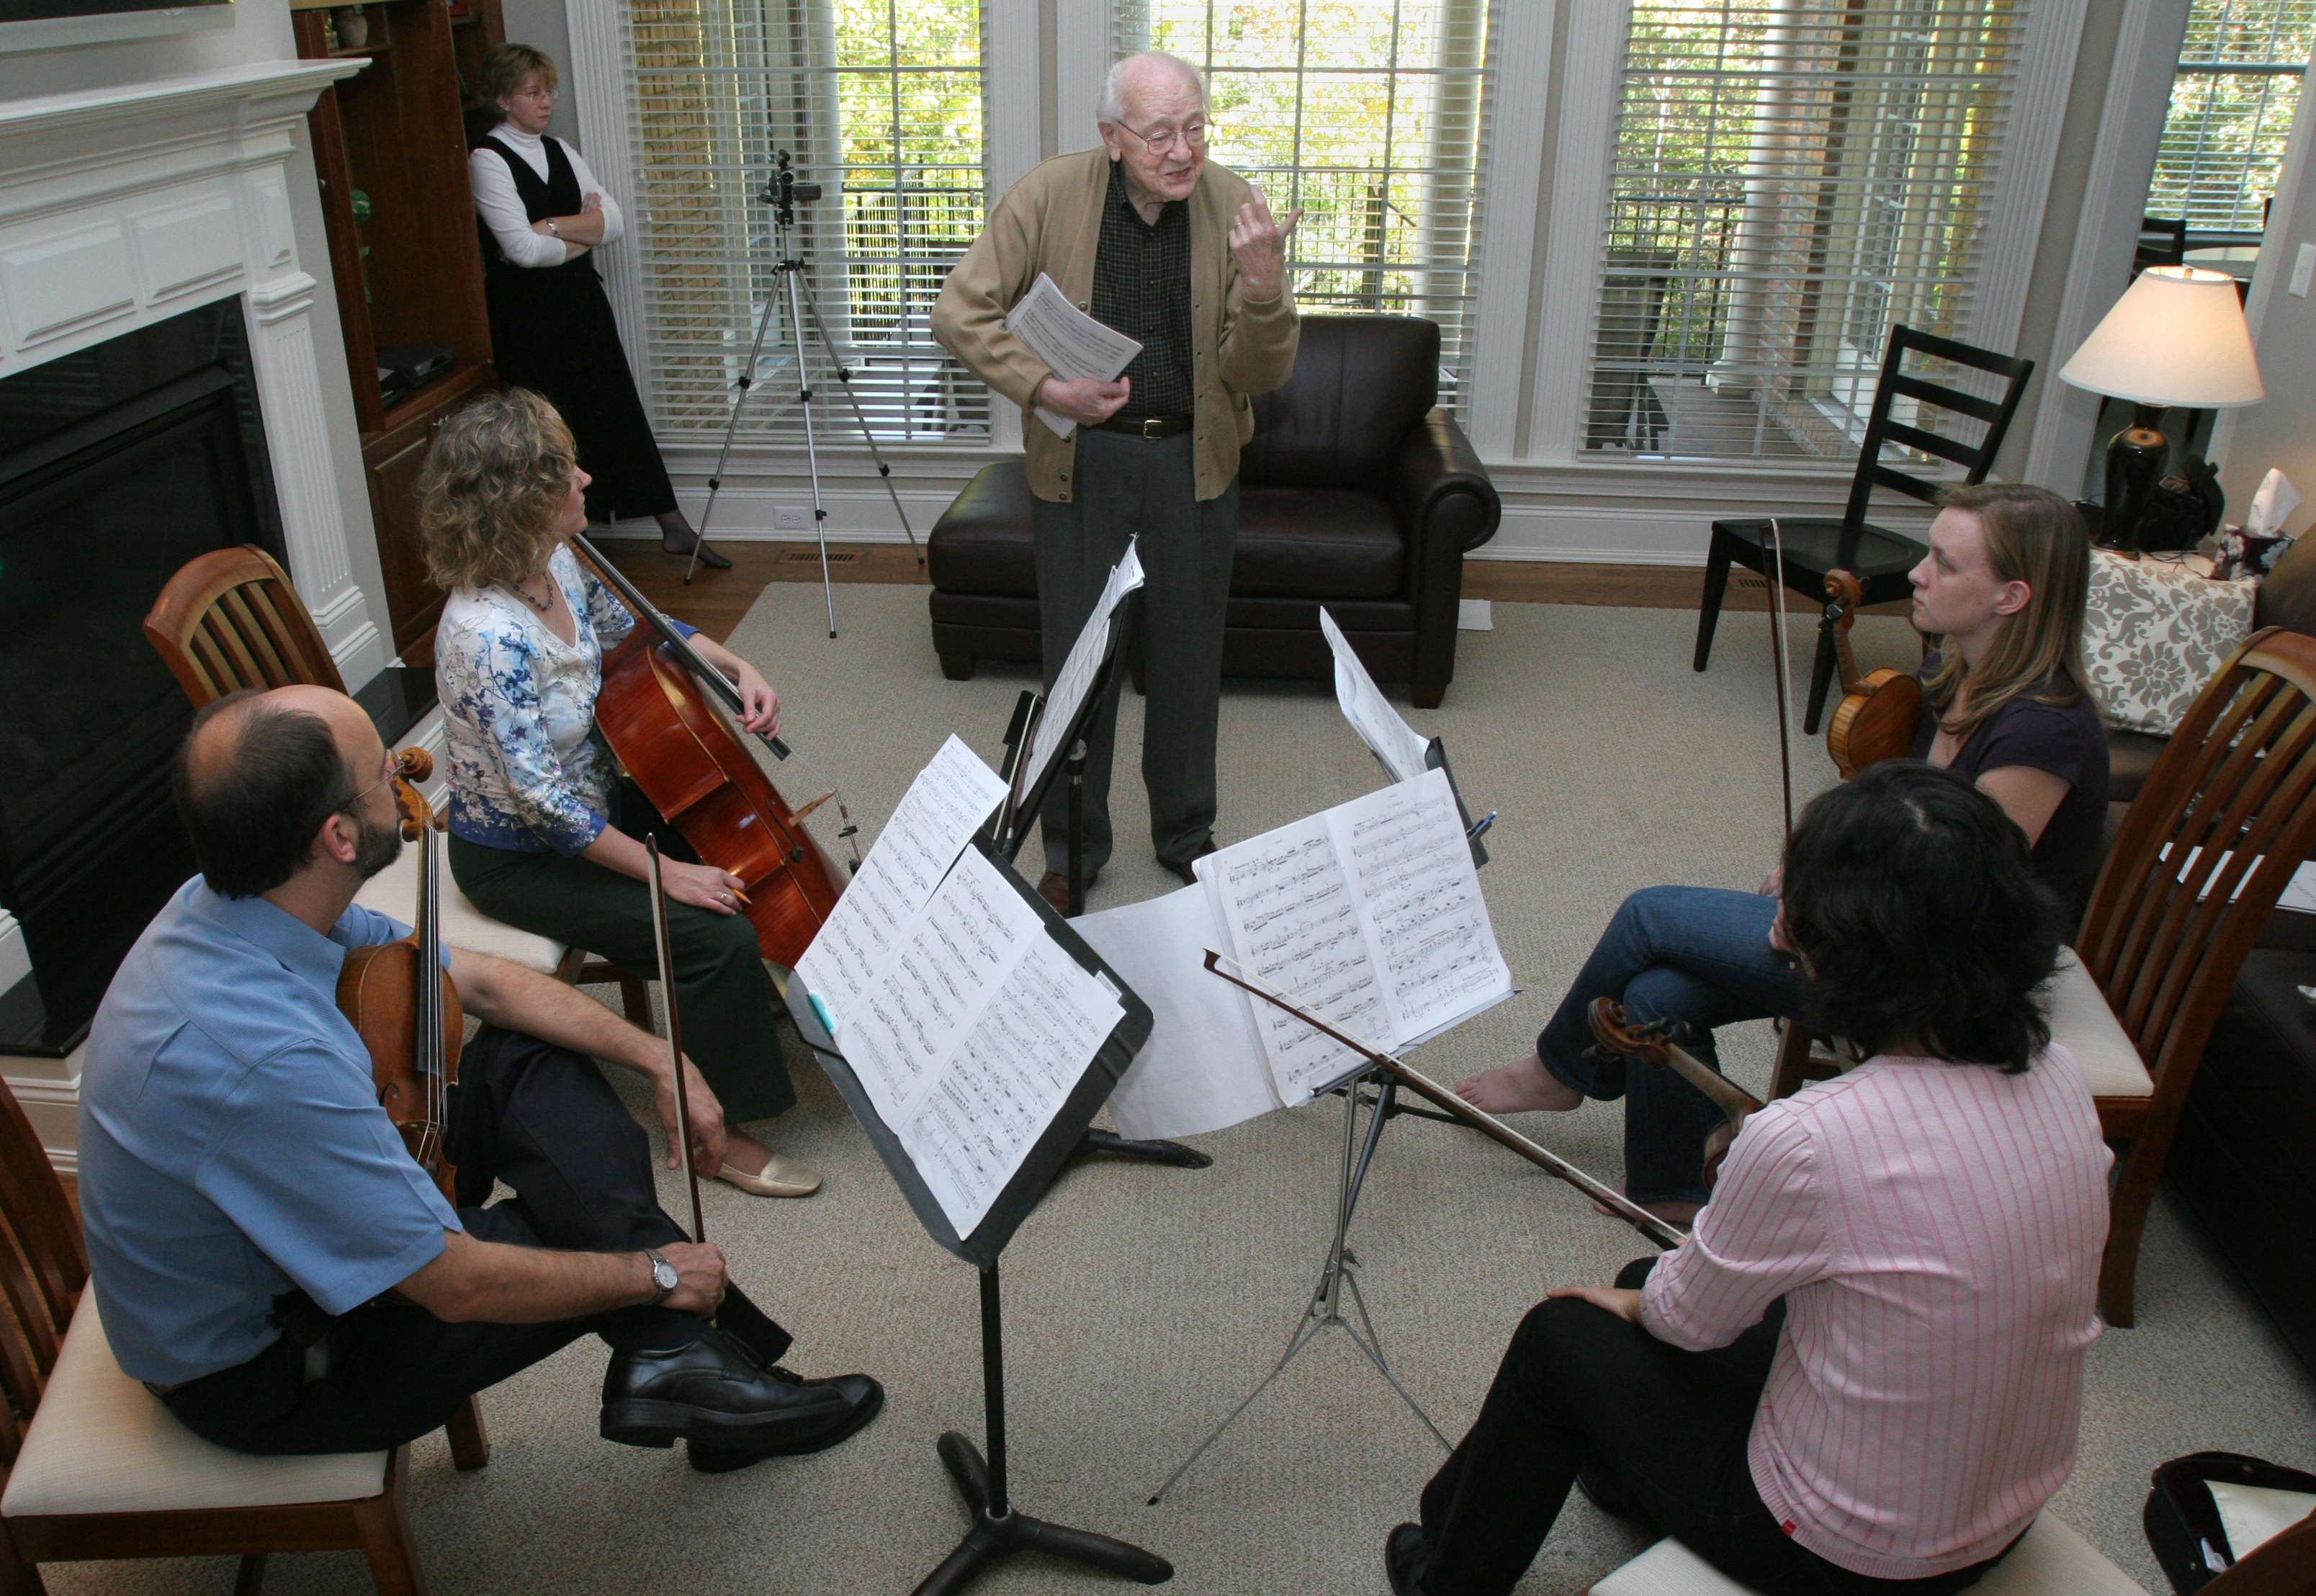 Karel Husa standing surrounded by a string quartet rehearsing in his home.